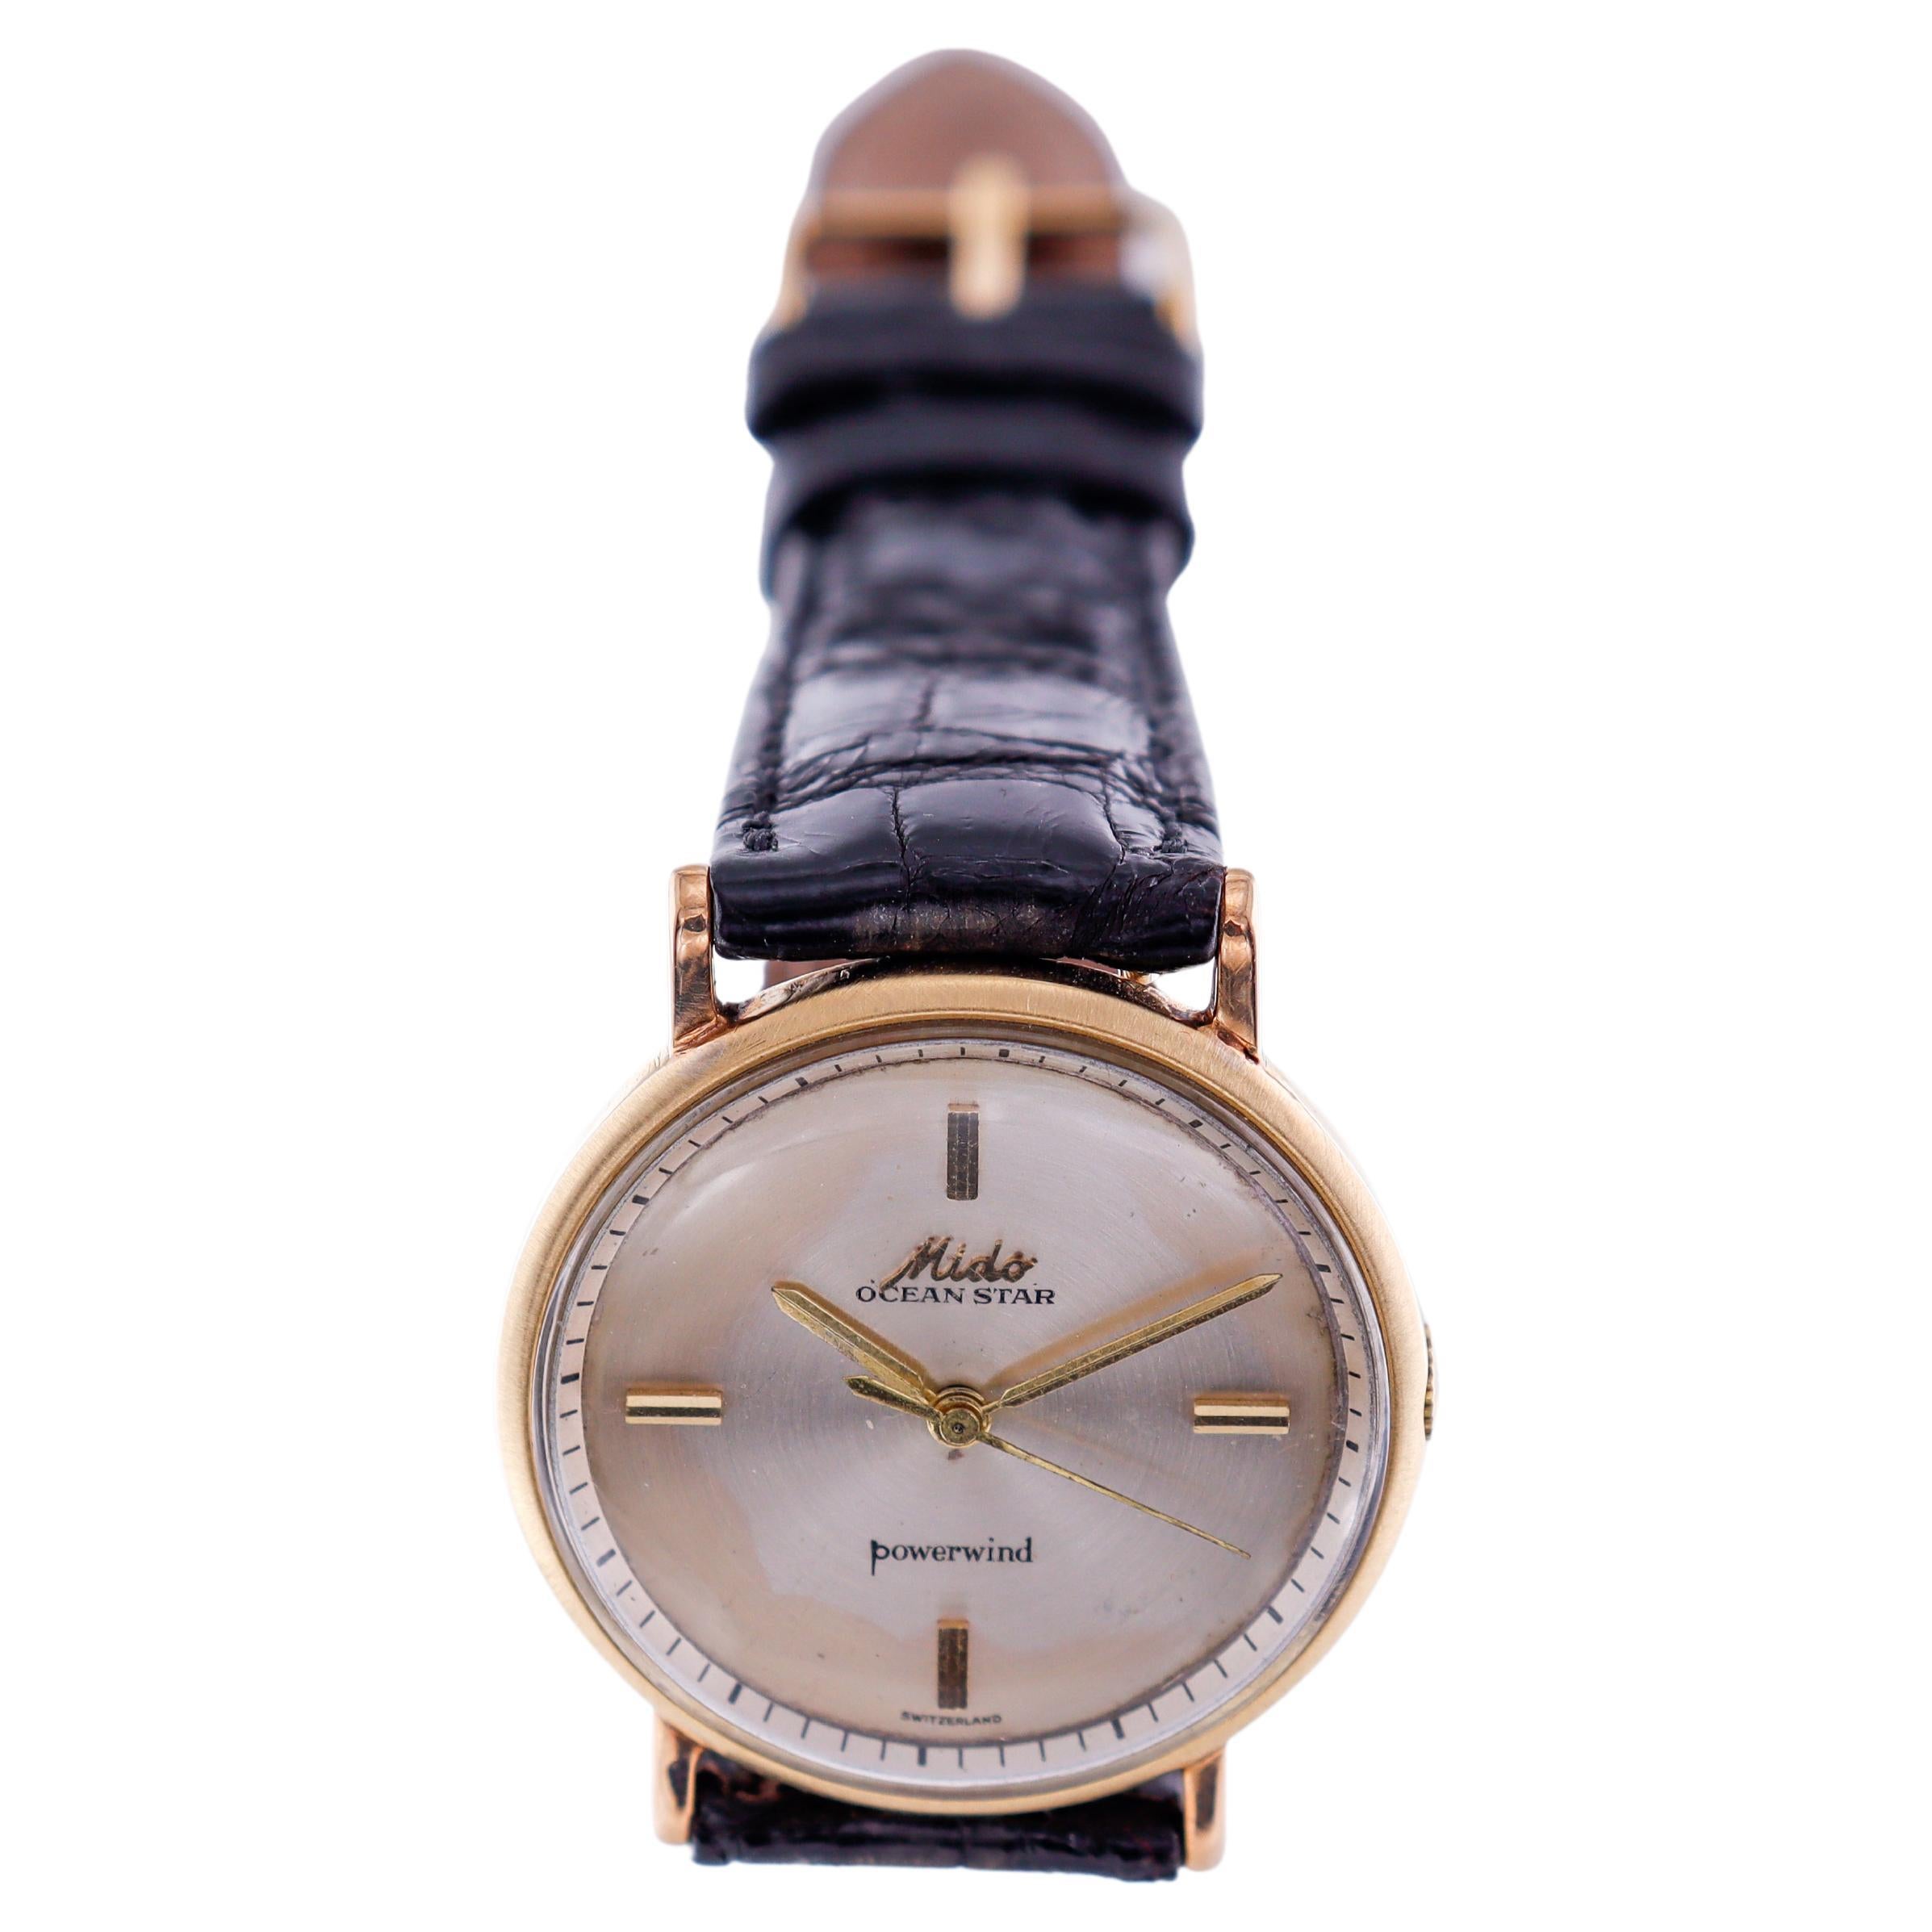 Modernist Mido 14Kt. Yellow Gold Ocean Star Art Deco Style Power Wind Watch, circa 1950s For Sale